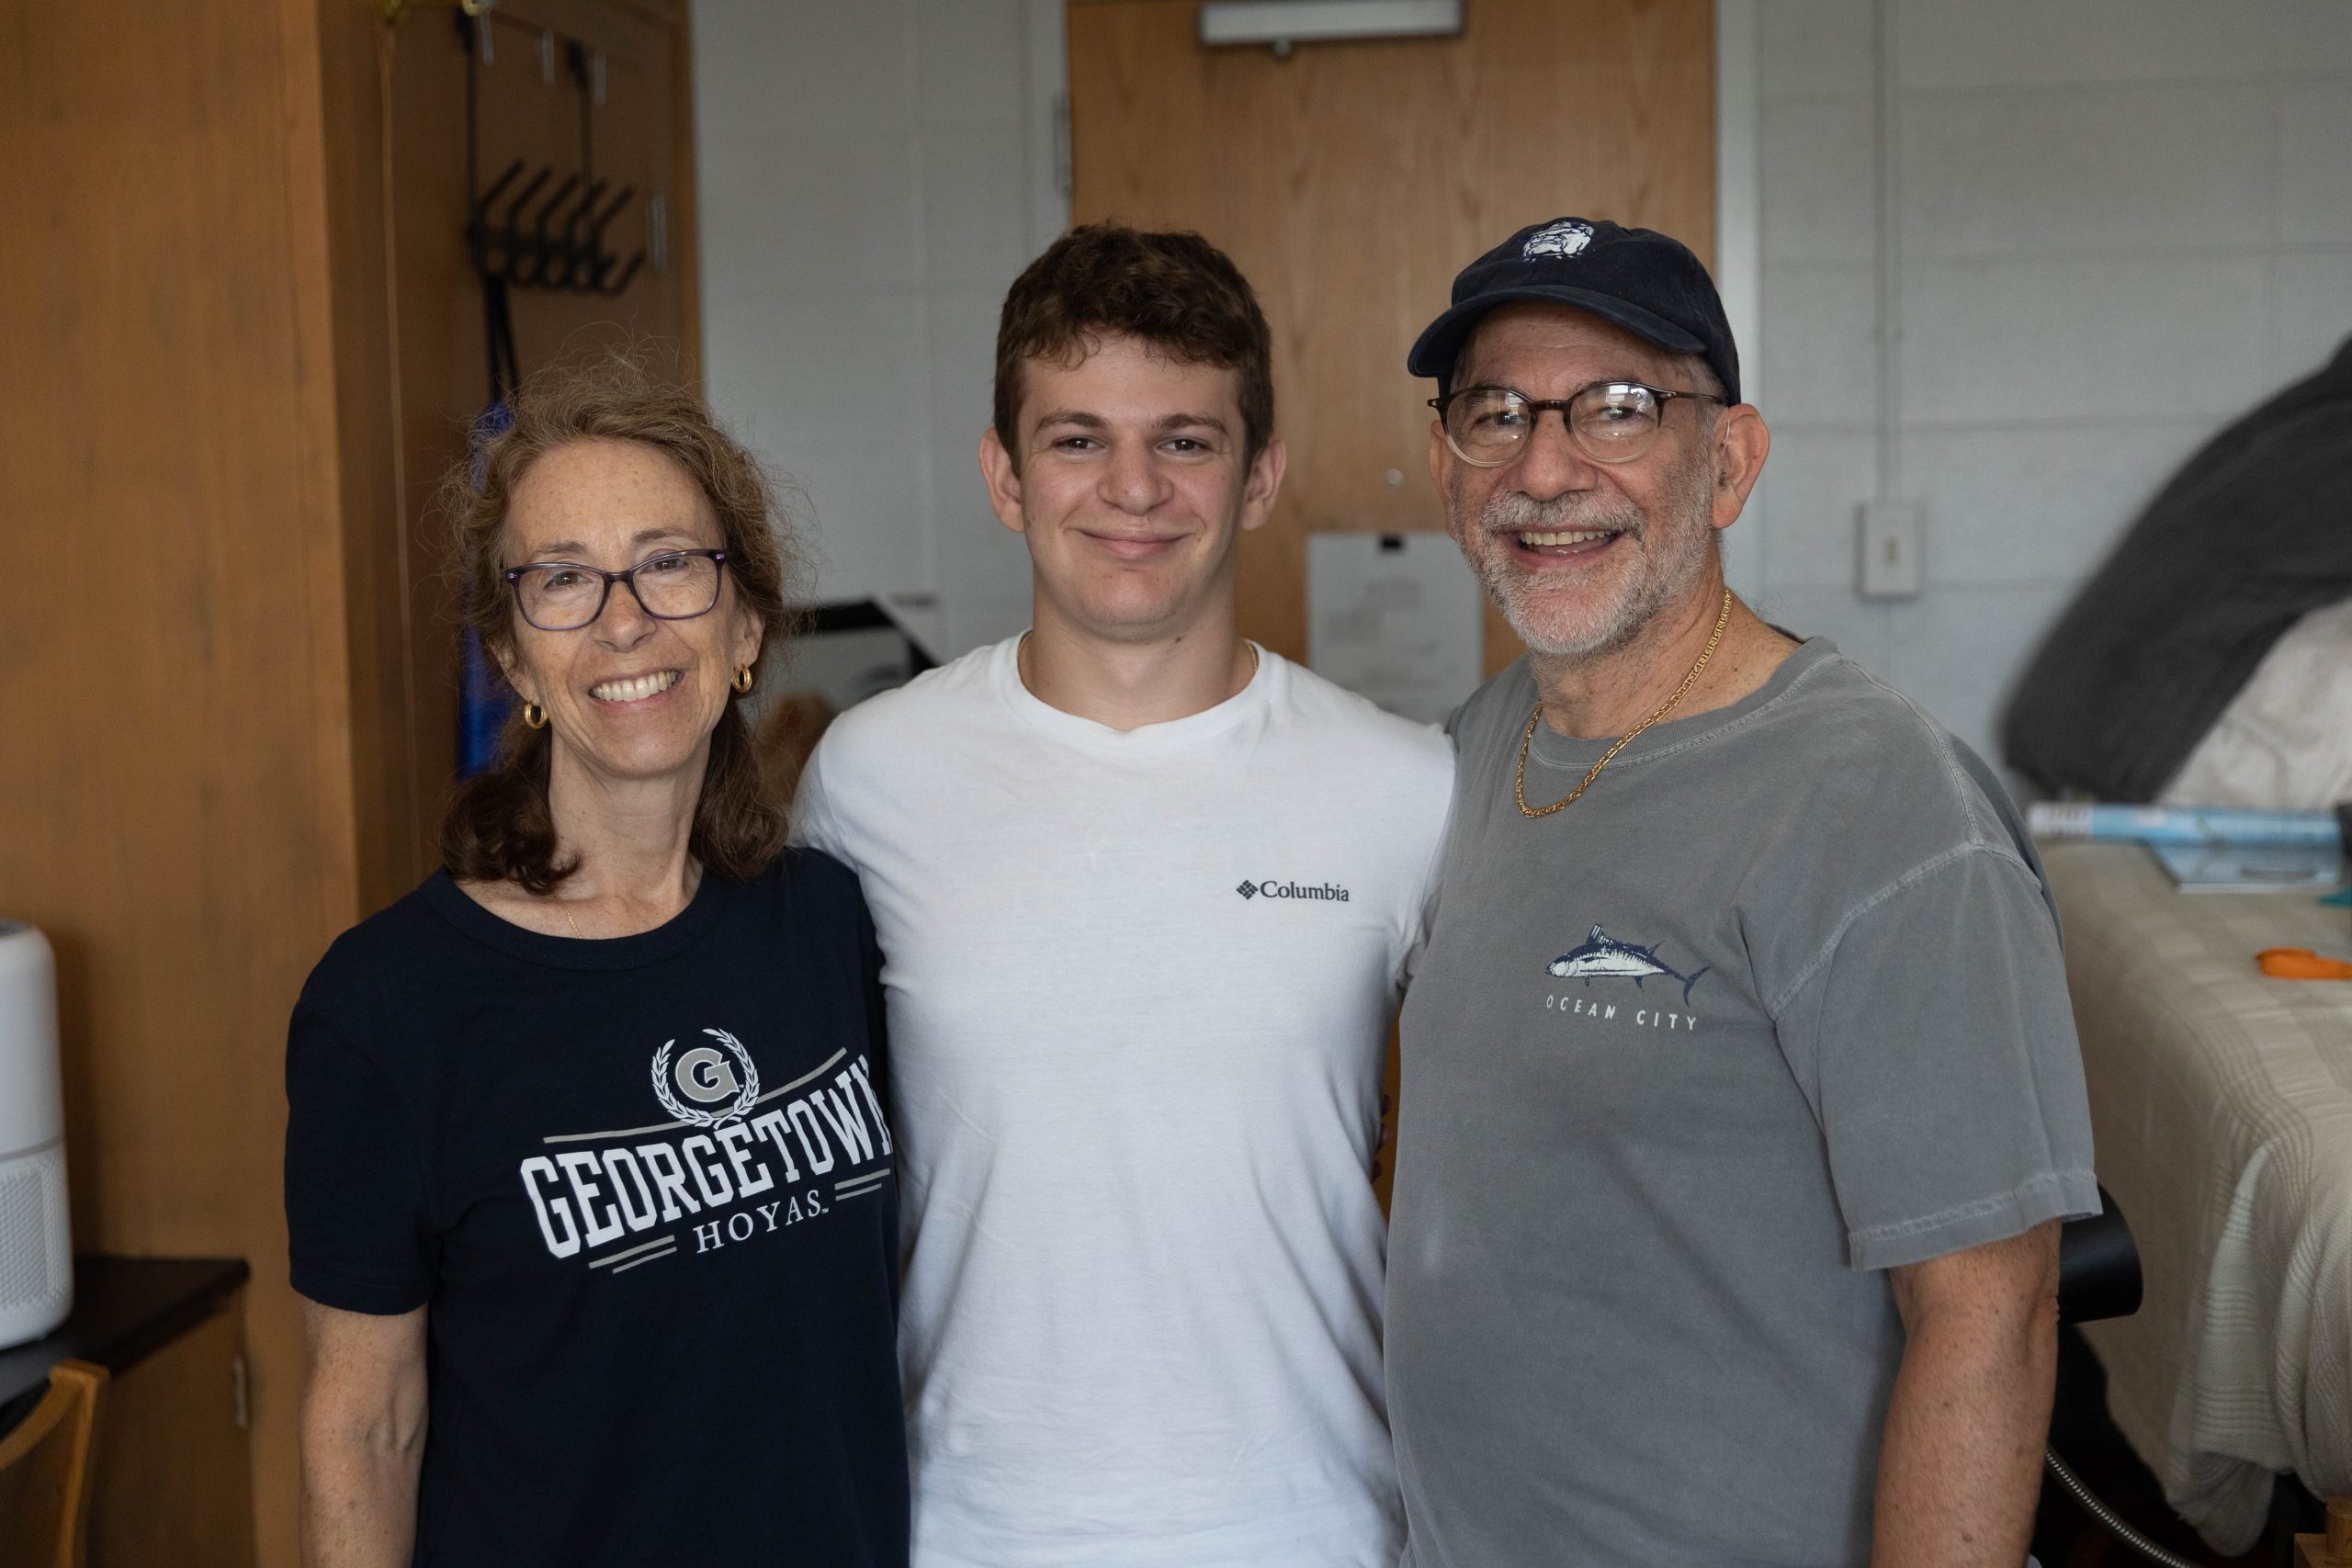 Brian Kaye (SOH’26) stands in between his two parents in his dorm room at Georgetown. They are all smiling at the camera.